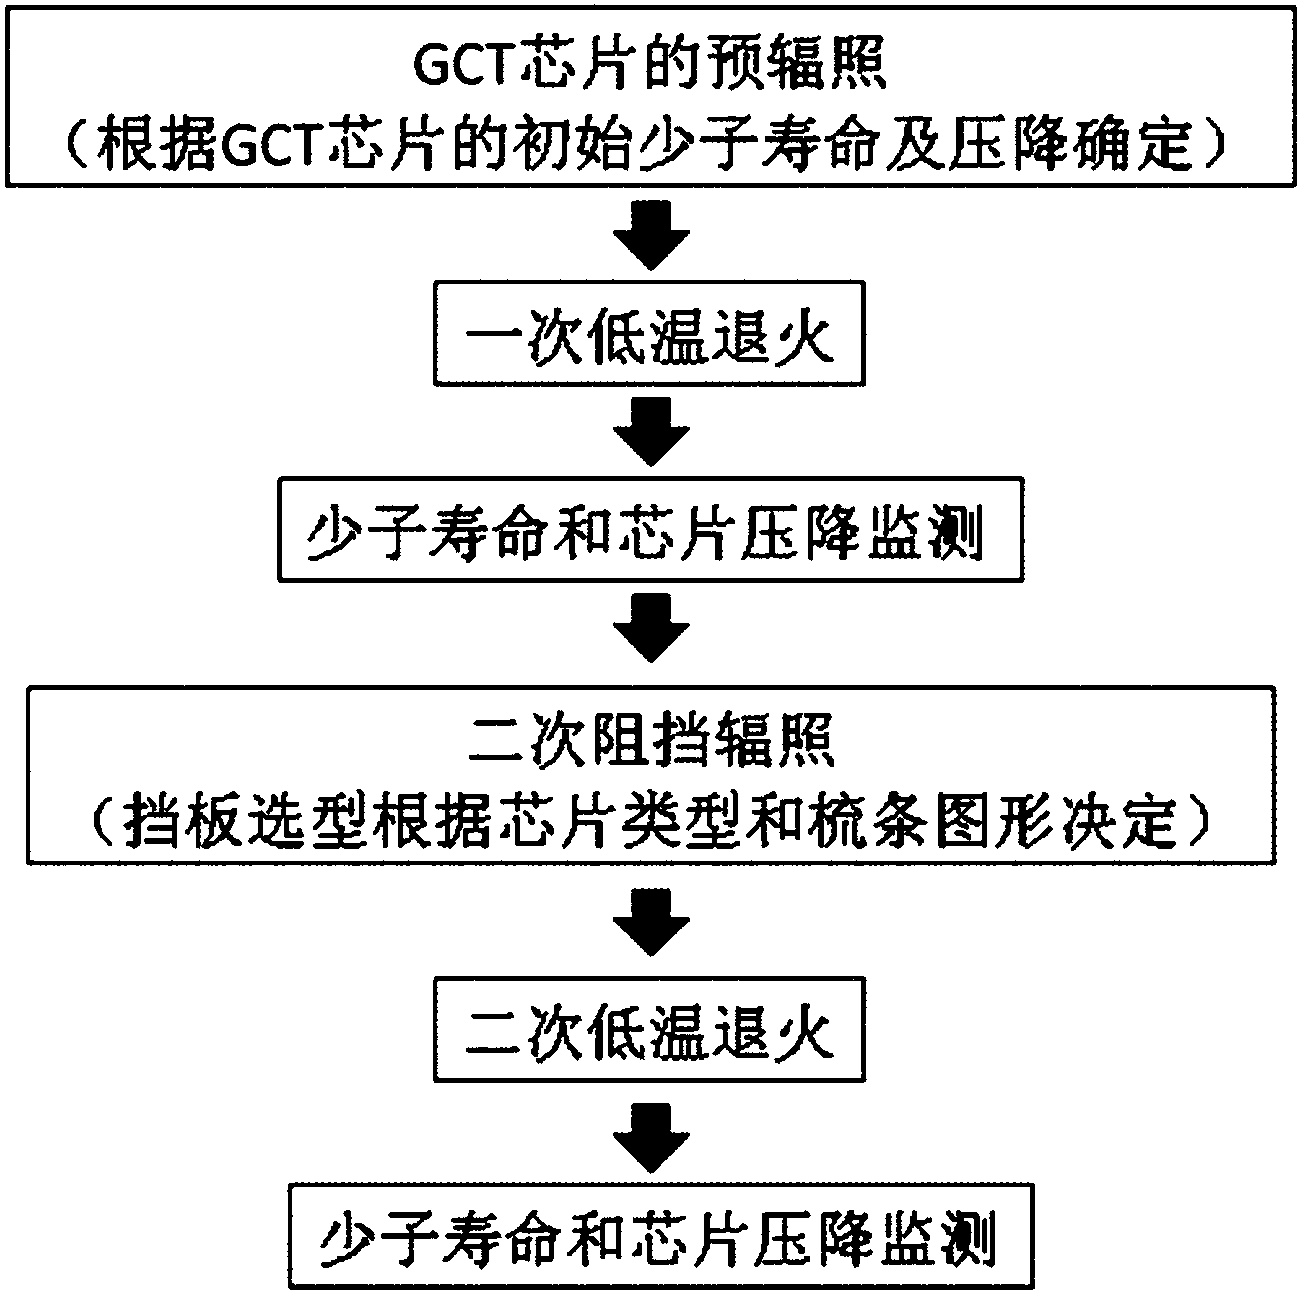 Crosswise heterogeneous electron irradiation method of improving global completion table (GCT) chip safe working area